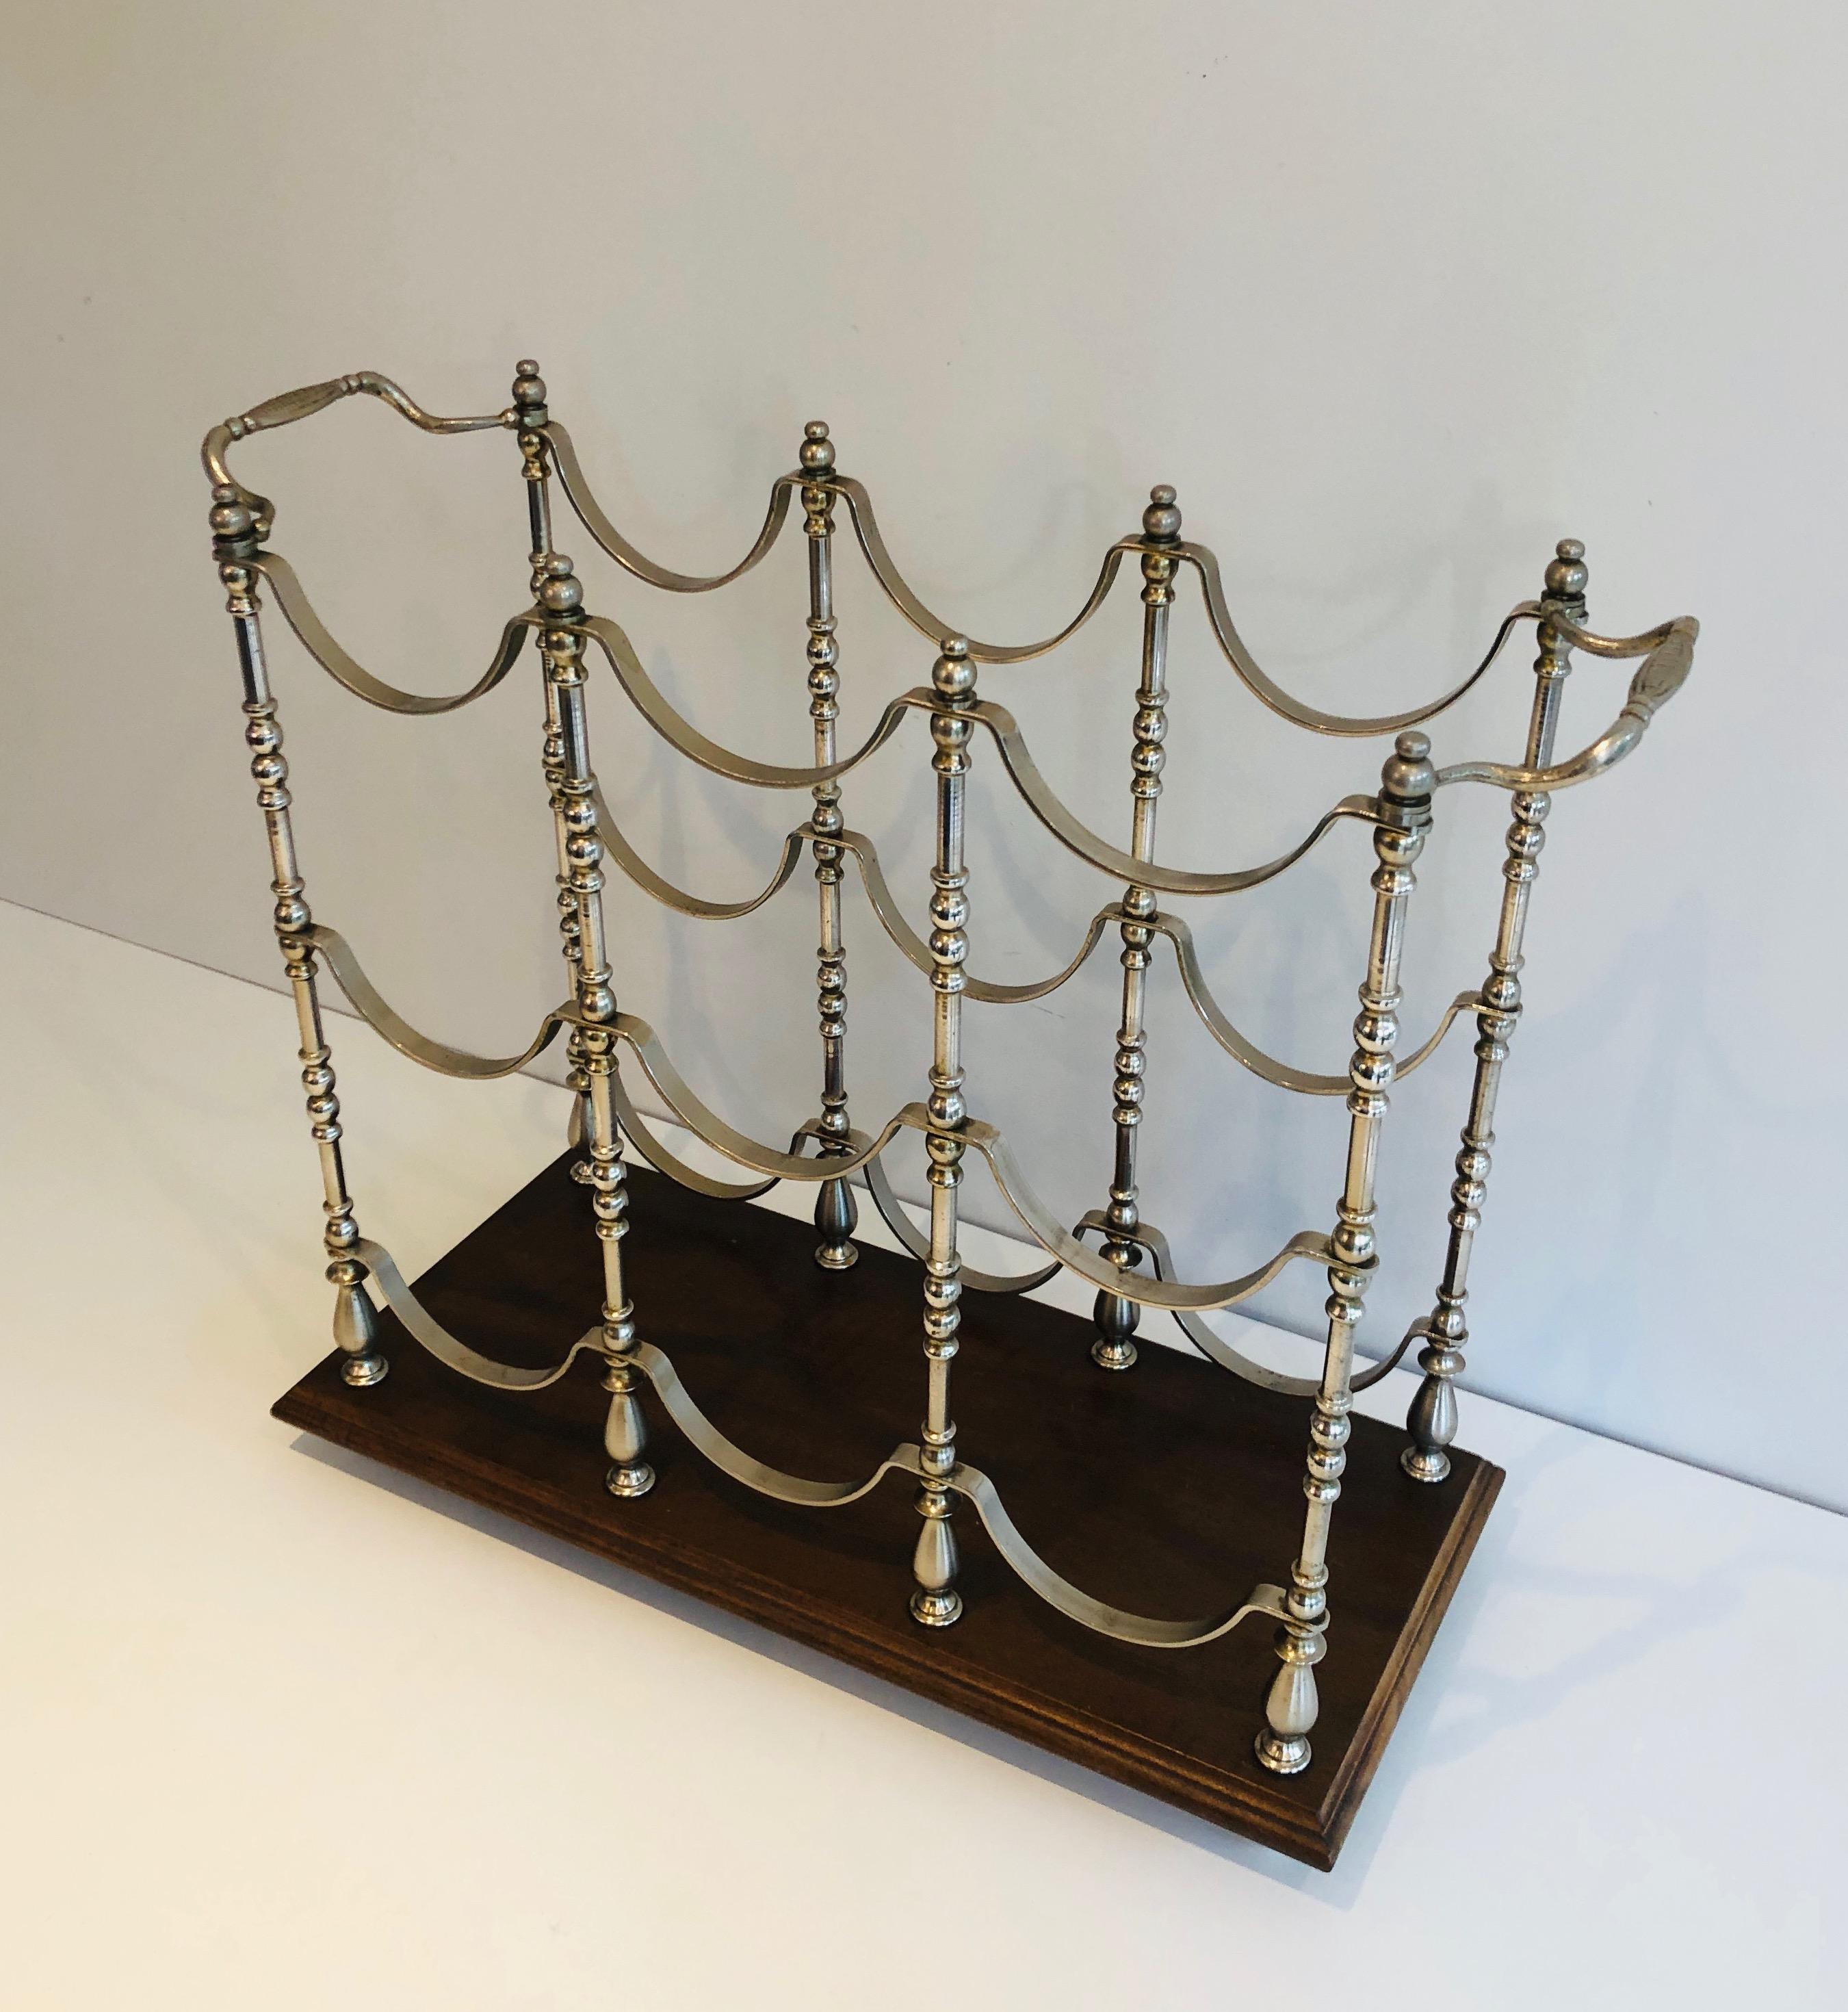 Silvered Metal Bottles Holder on a Wooden Base, French, Circa 1960 For Sale 10